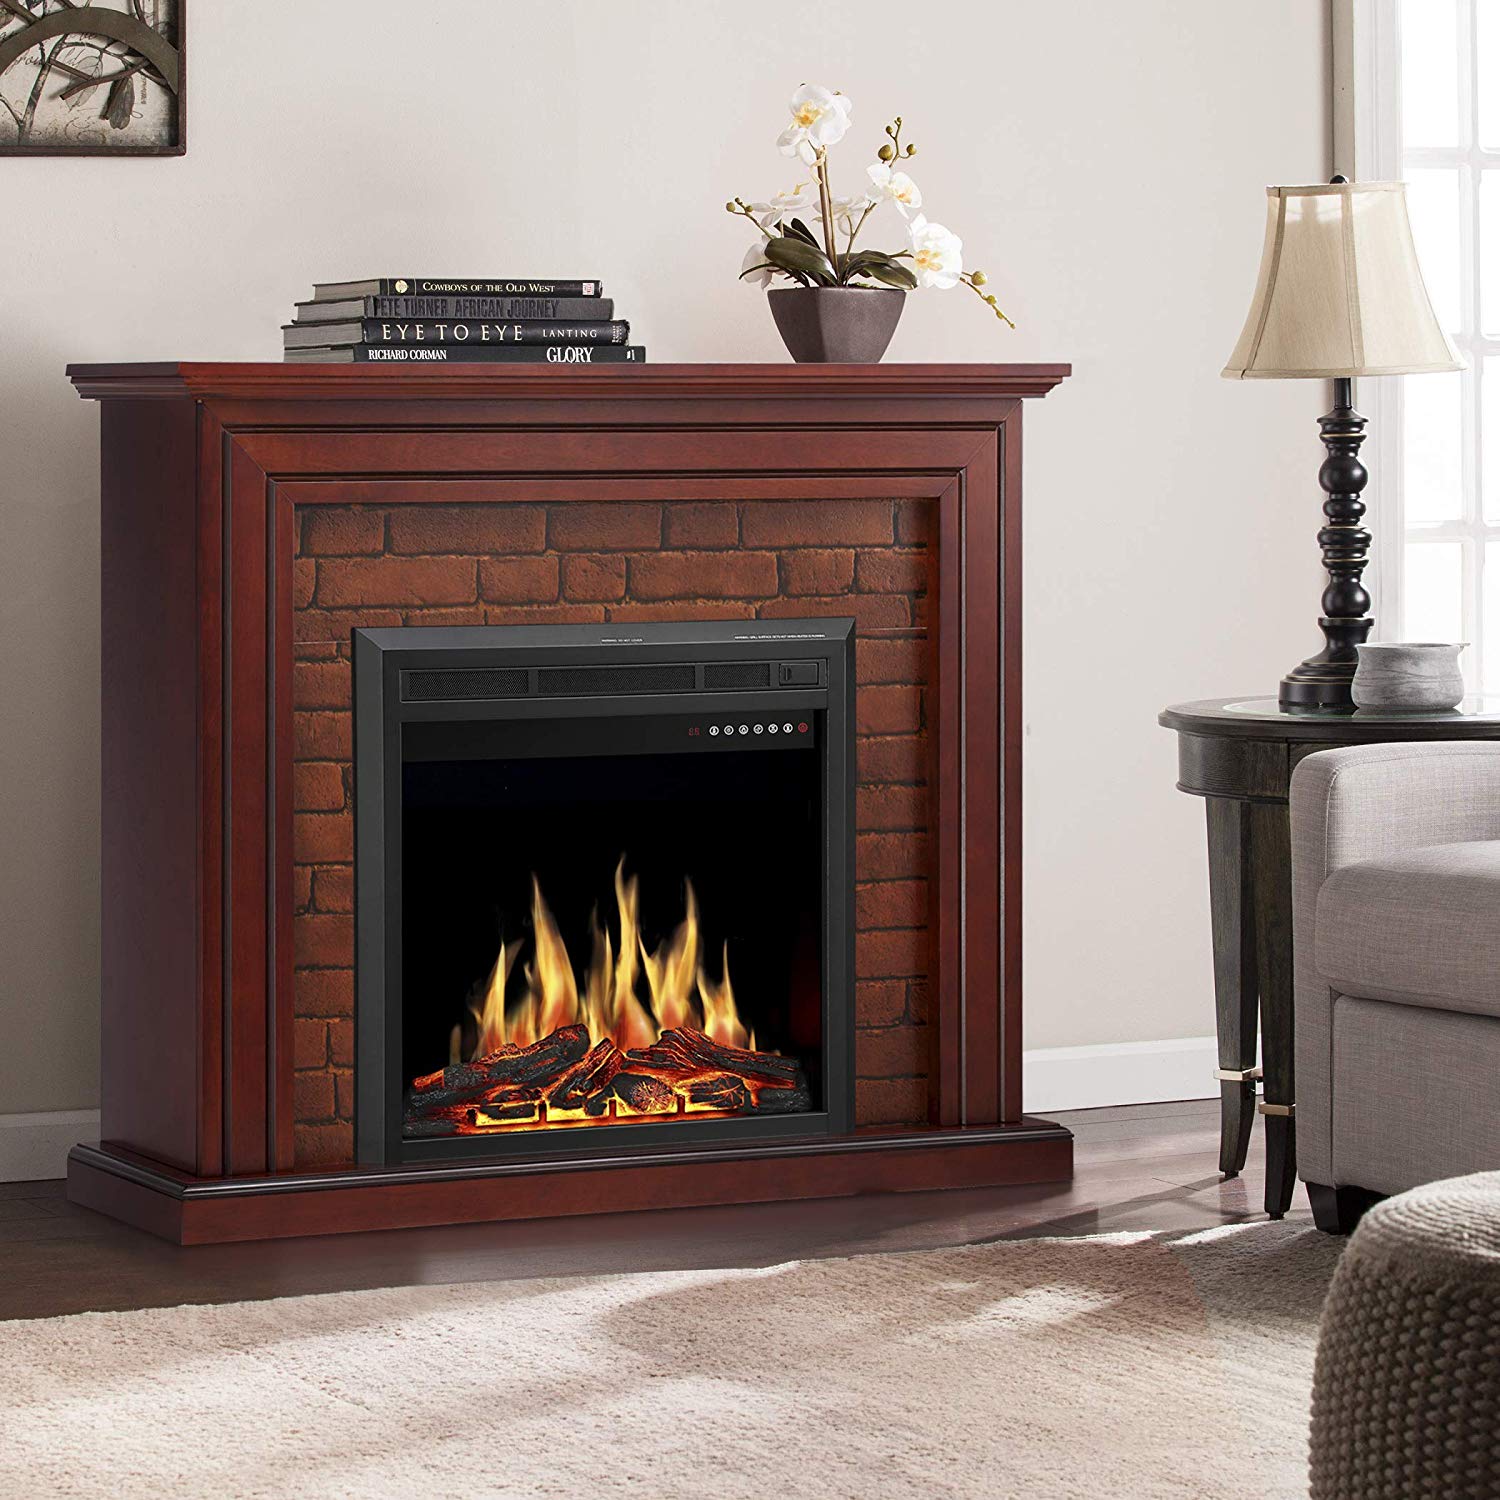 Free Standing Corner Electric Fireplace Best Of Jamfly Electric Fireplace Mantel Package Traditional Brick Wall Design Heater with Remote Control and Led touch Screen Home Accent Furnishings